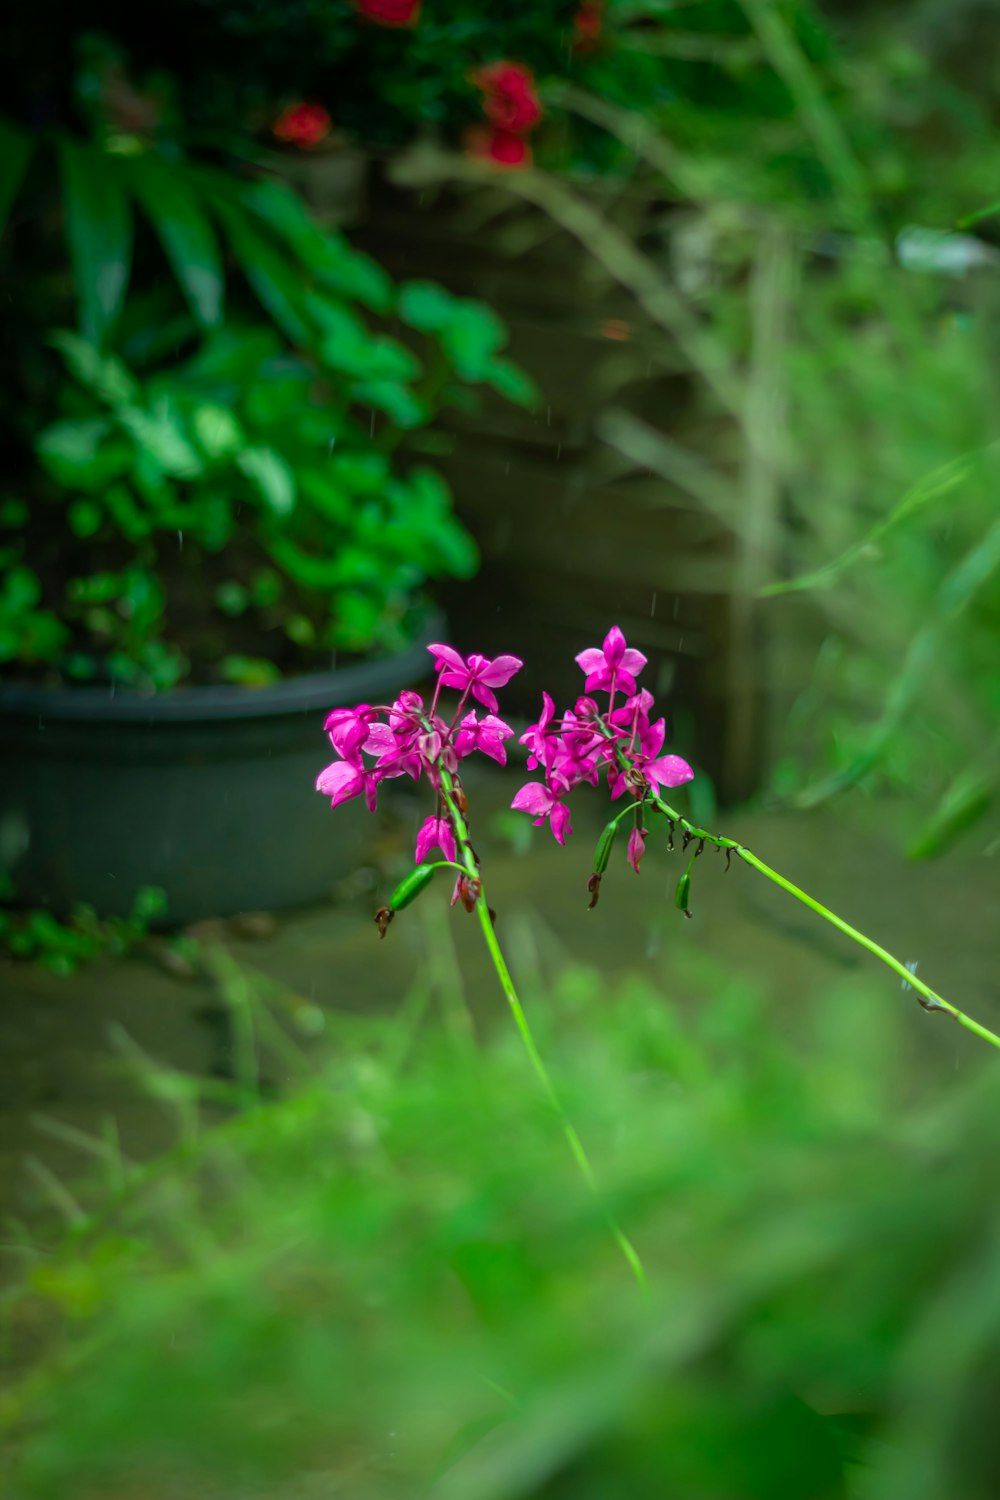 a pink flower is in the foreground and a potted plant in the background